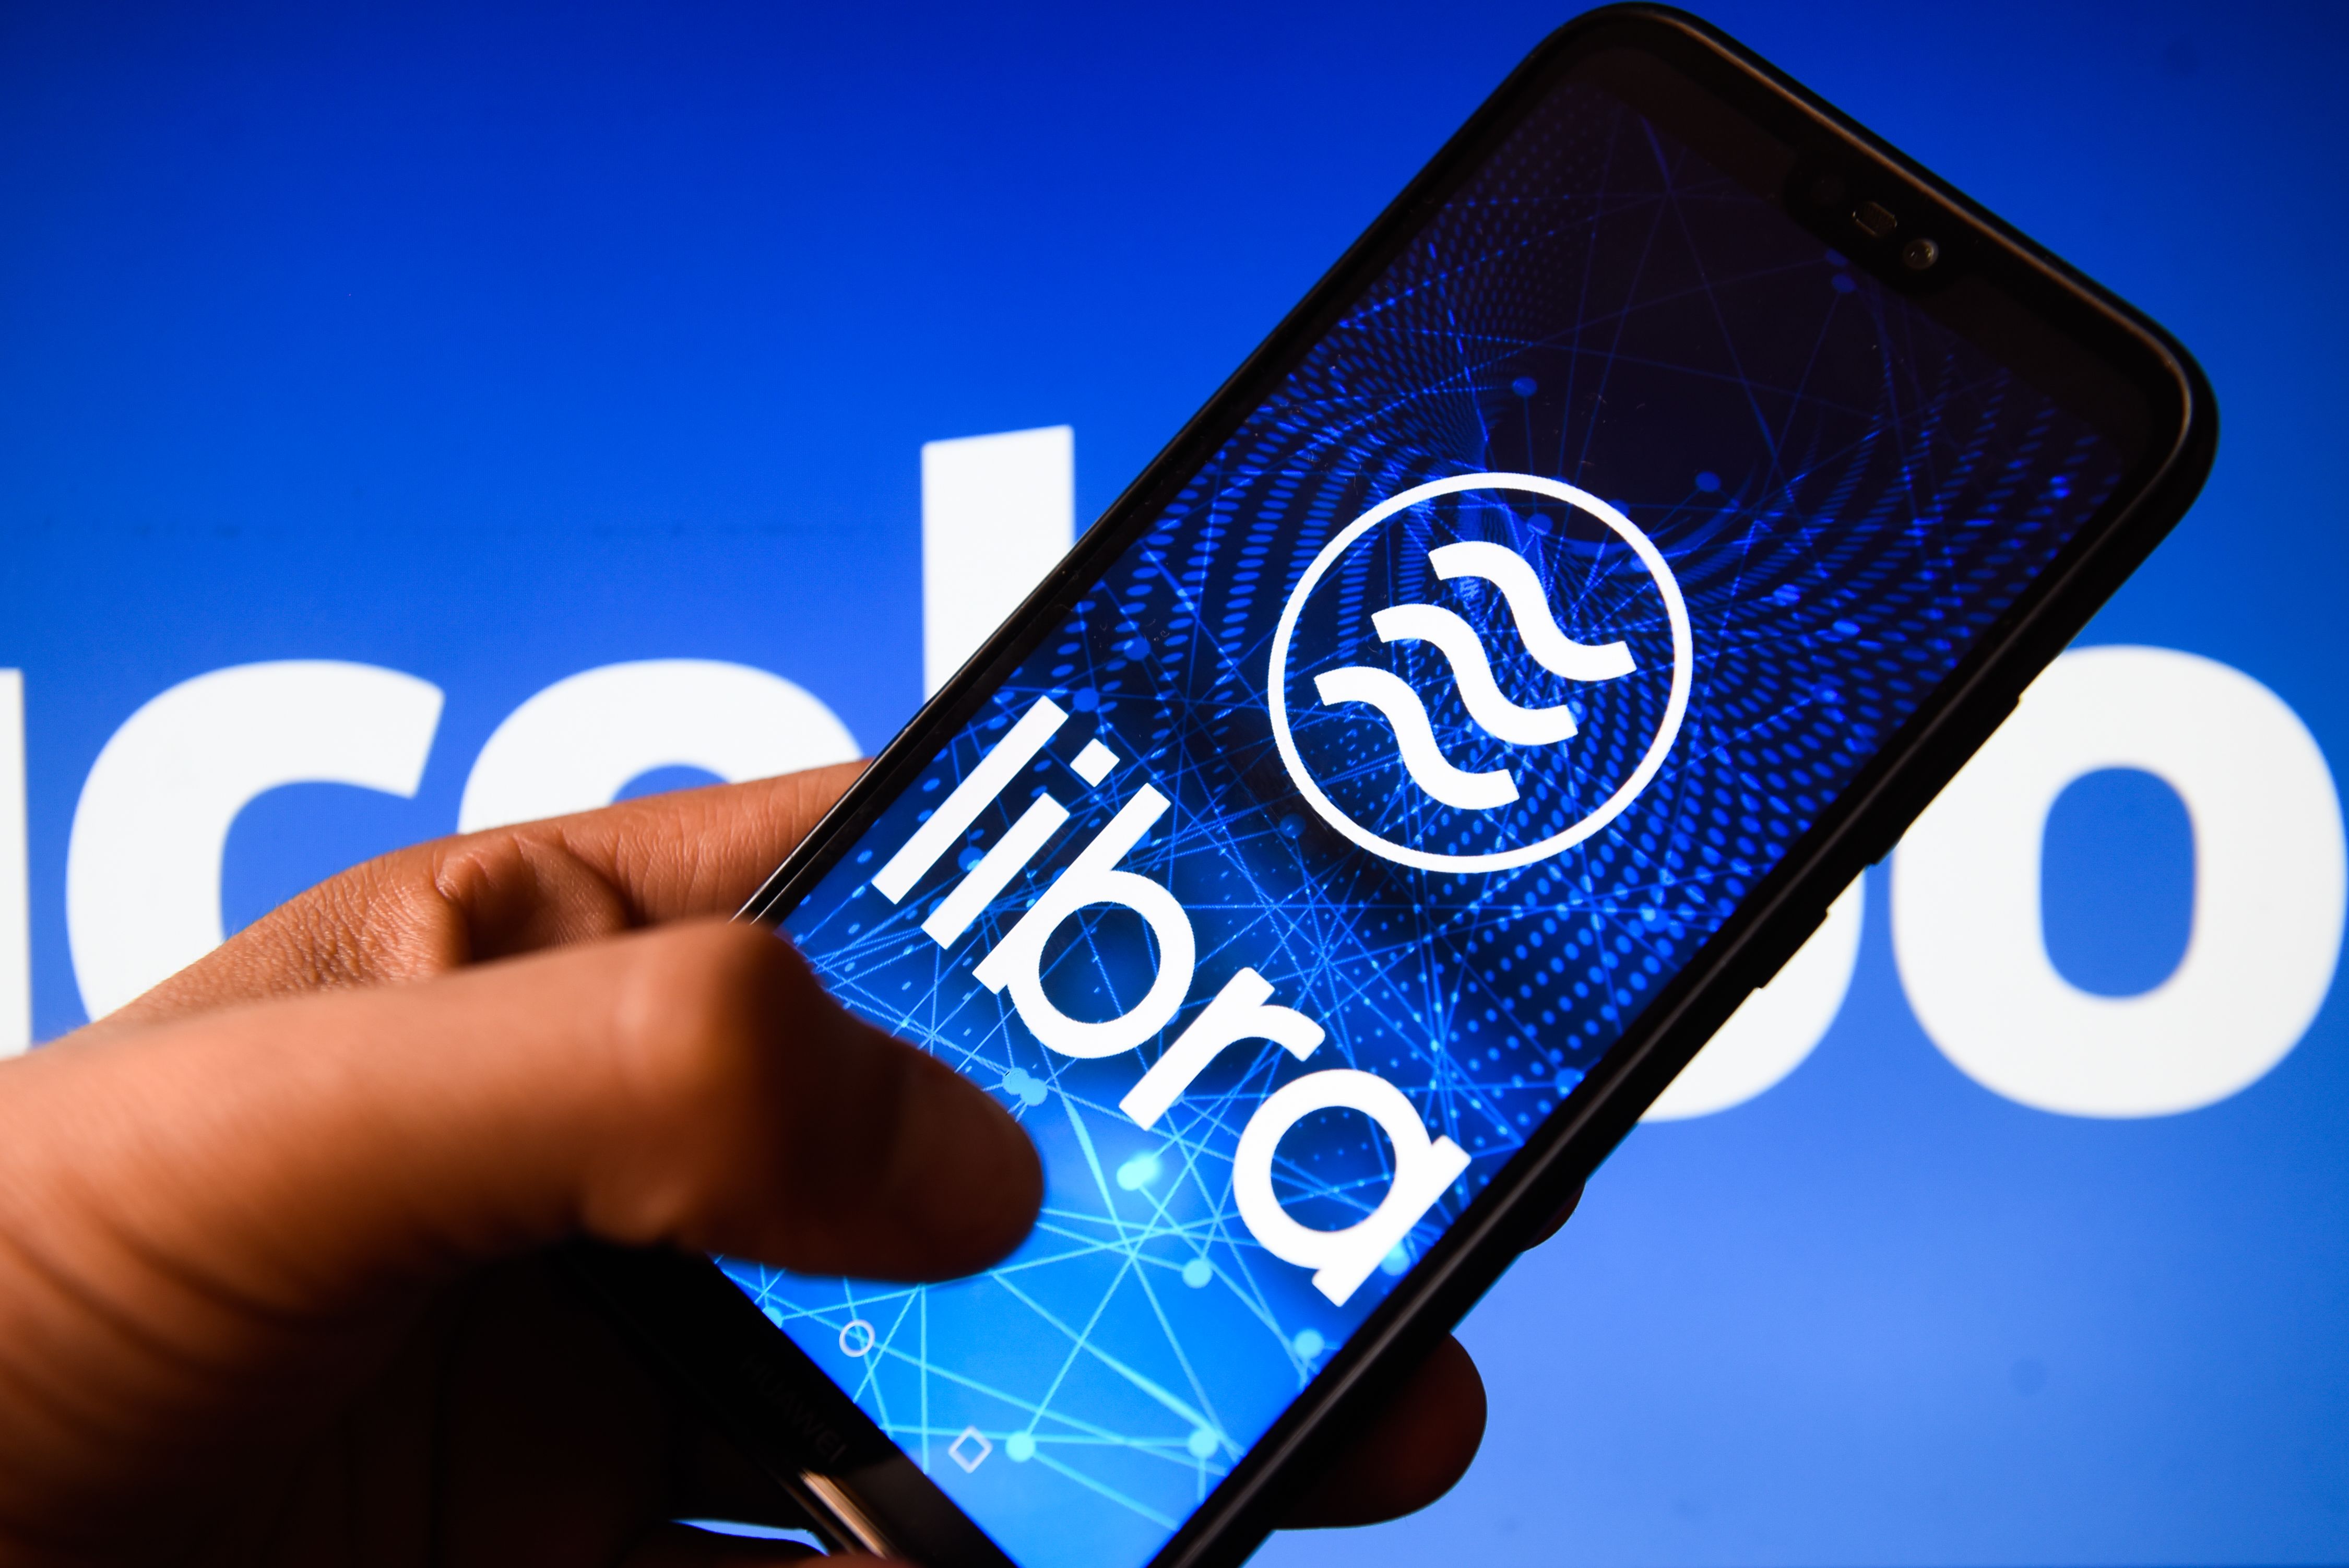 Facebook's Libra crypto plans are under fire from privacy regulators